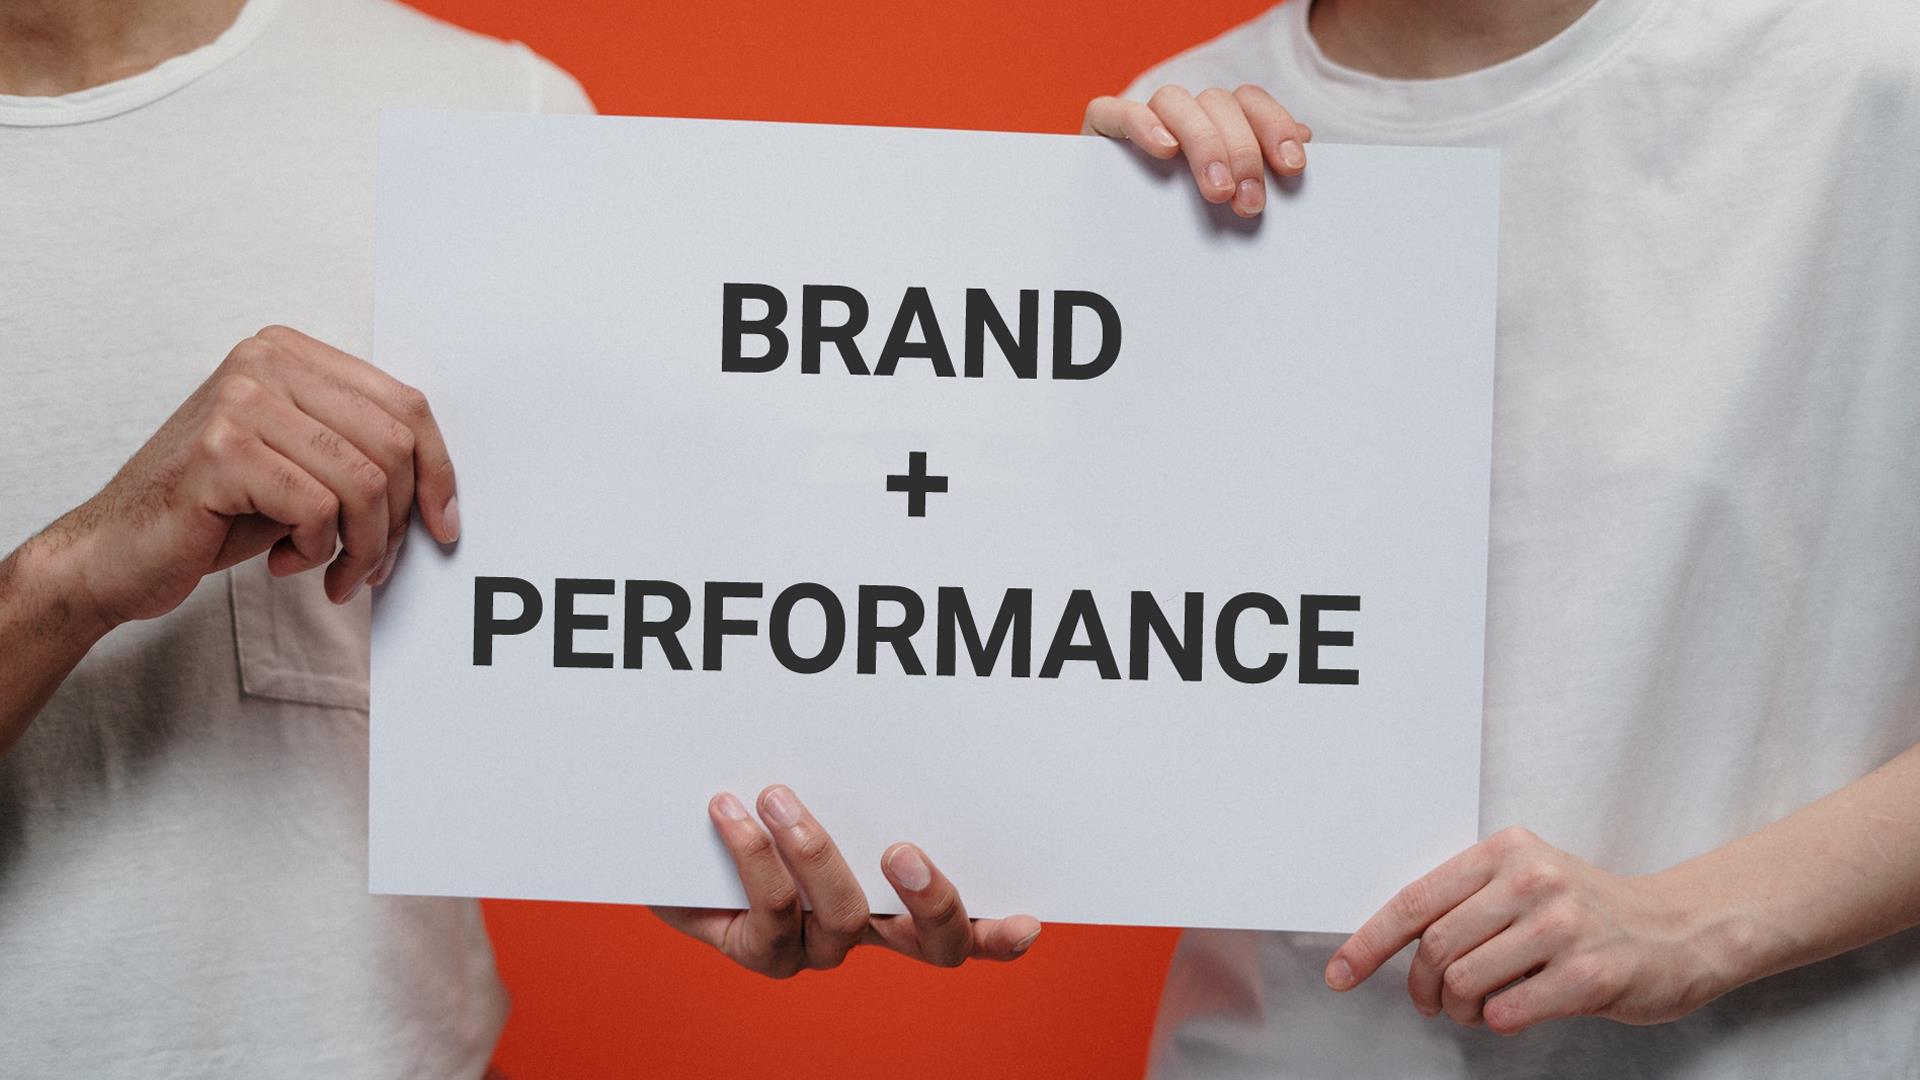 Performance, you complete me: Putting the brand in “Brandformance” | Media Matters Worldwide